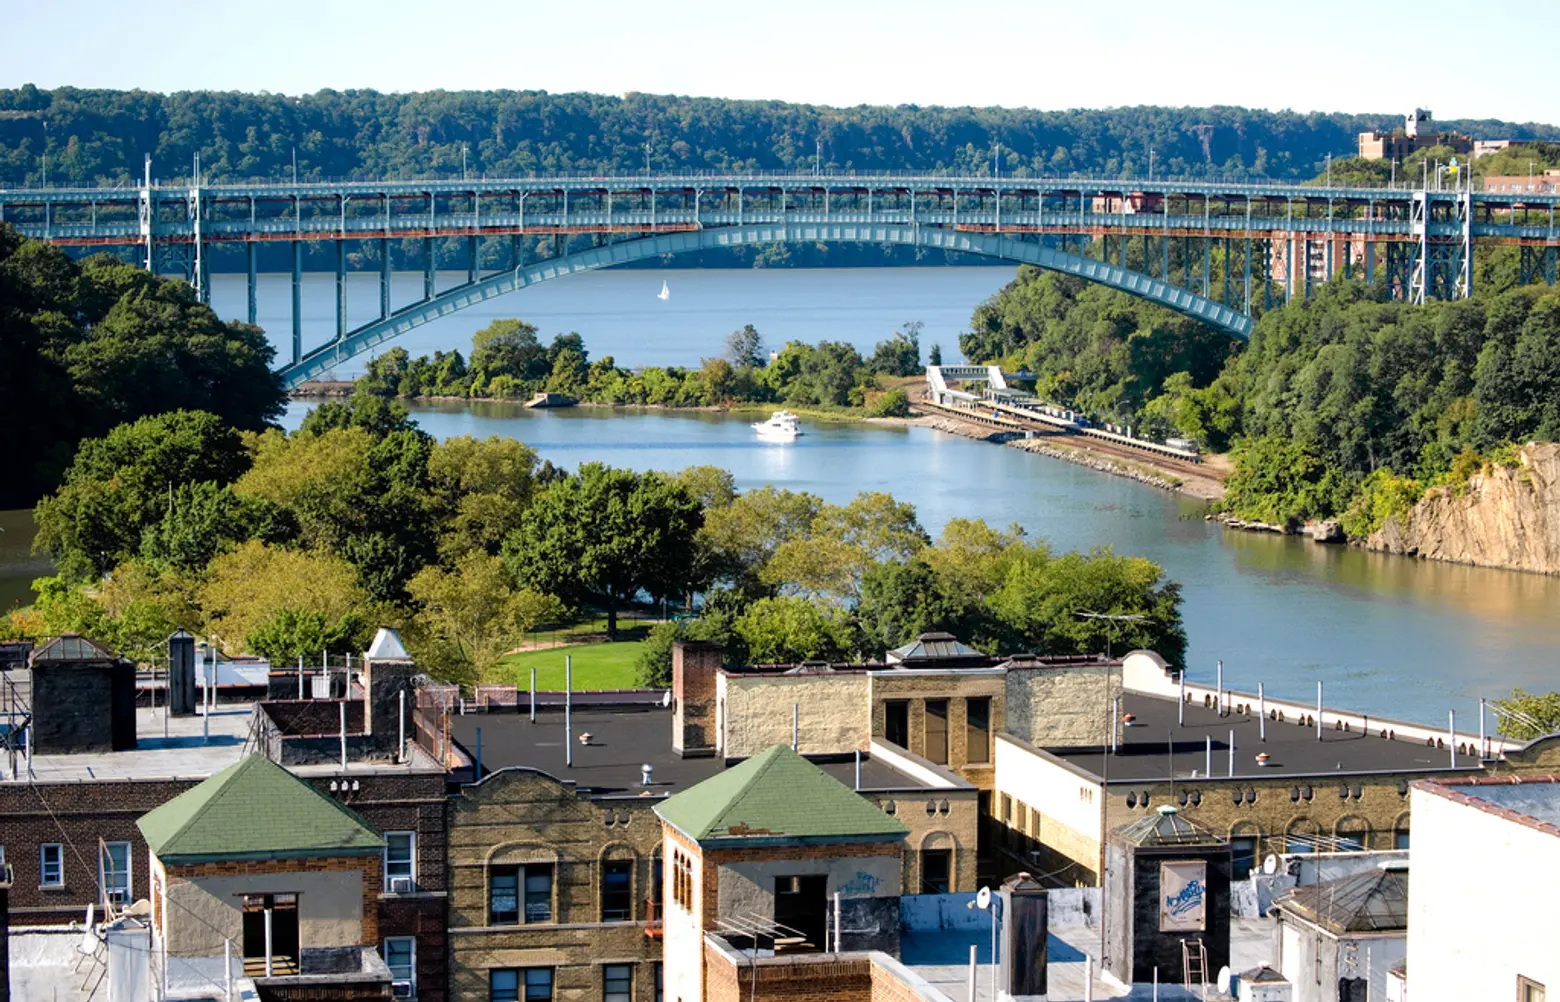 Designs sought for two new waterfront parks in Inwood